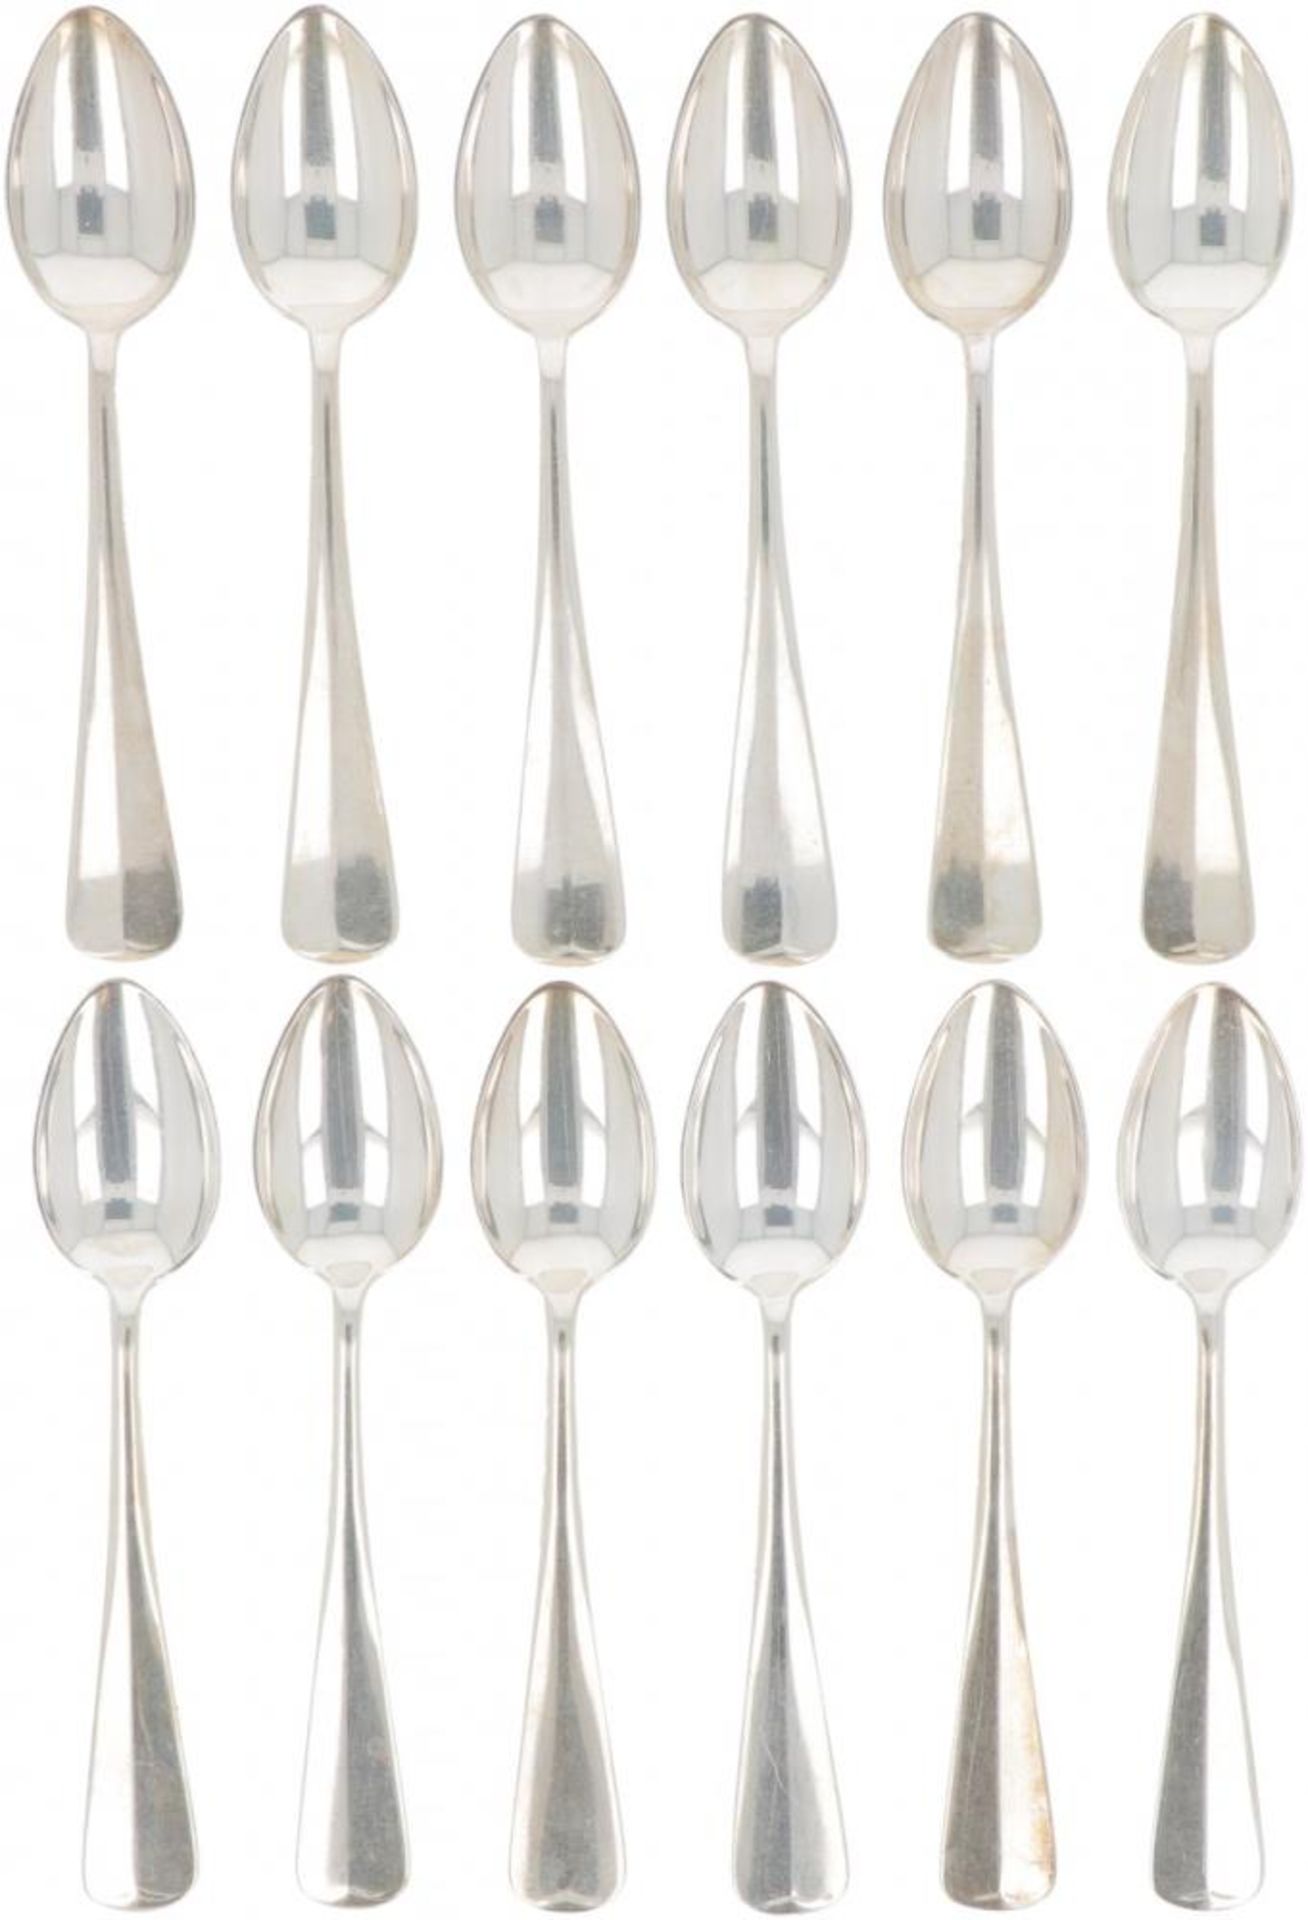 (12) piece set coffee spoons "Haags Lofje" silver.